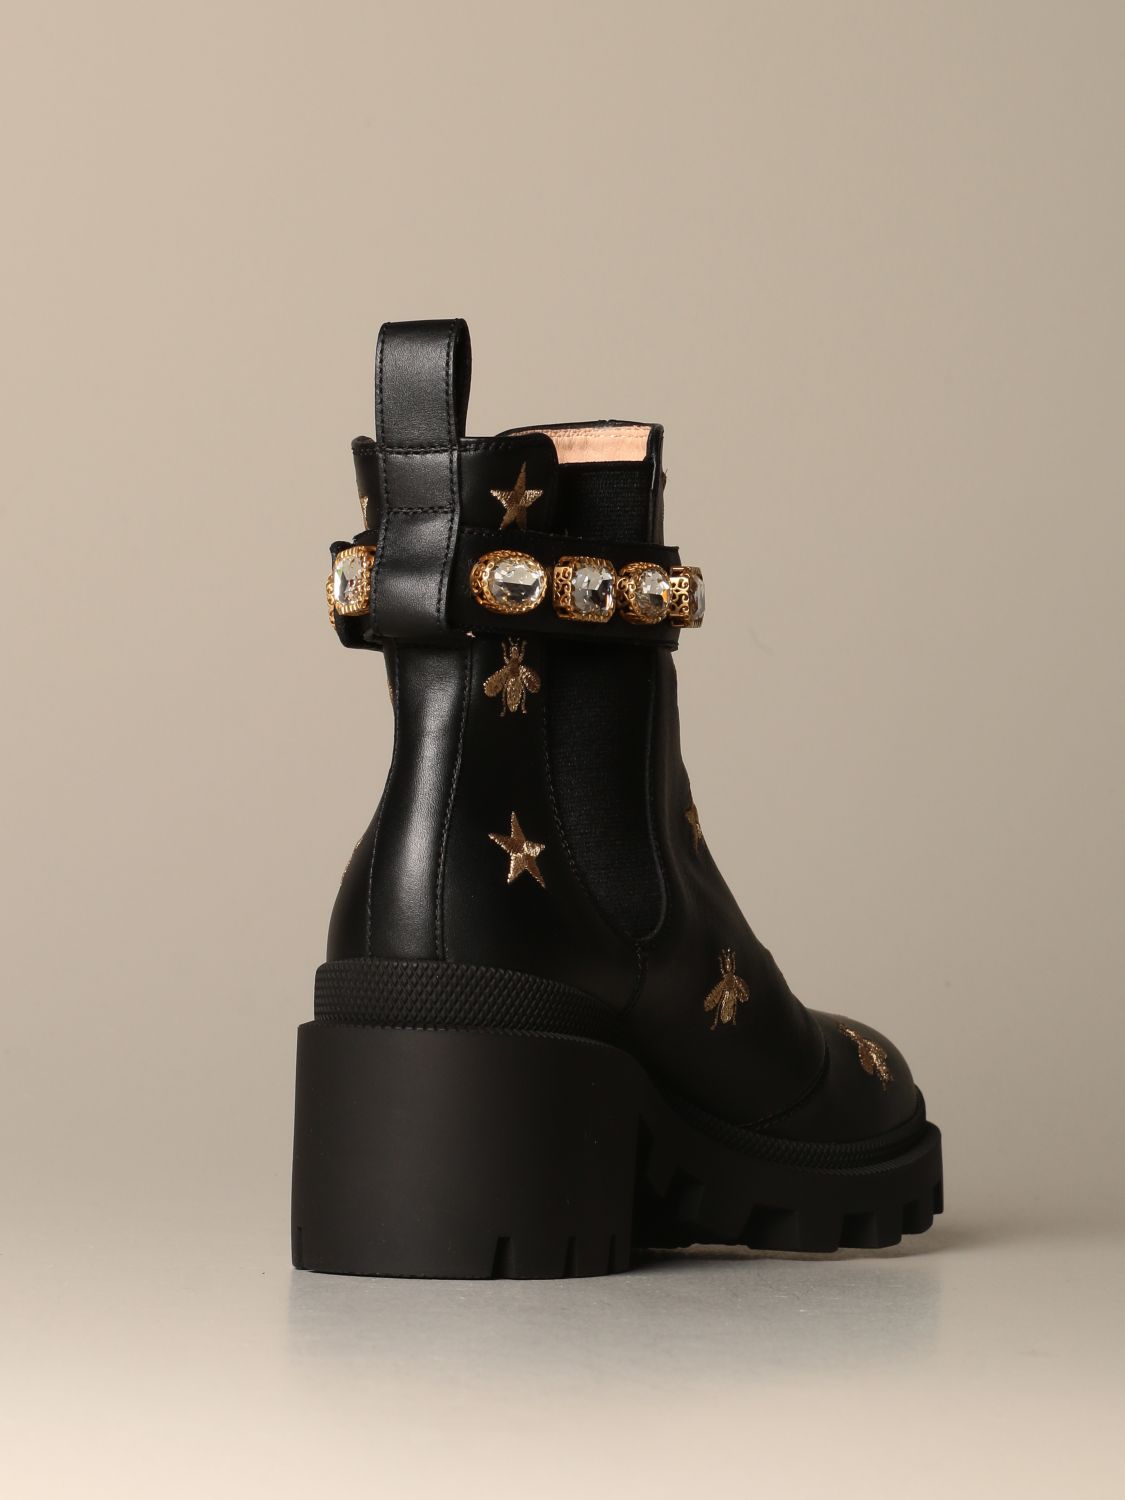 GUCCI: ankle boot in leather with bee embroidery and stars all over - Black | Gucci heeled booties 557735 AYO10 online GIGLIO.COM